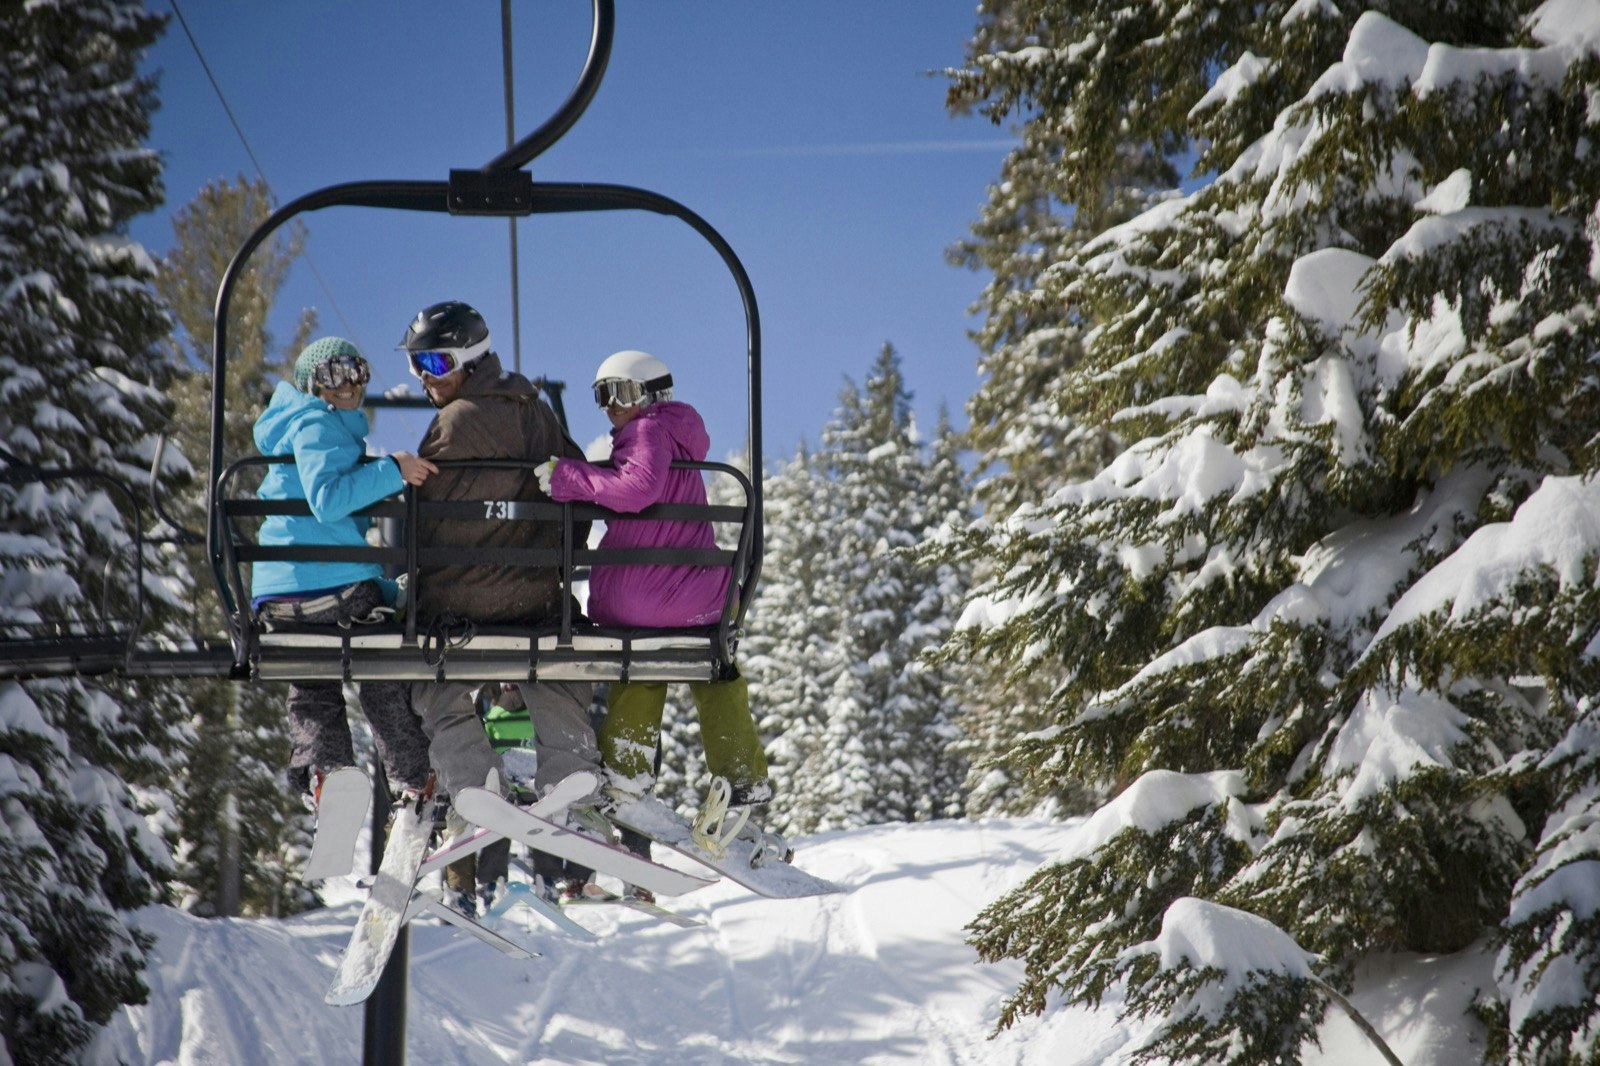 Three people on a chairlift with skis 